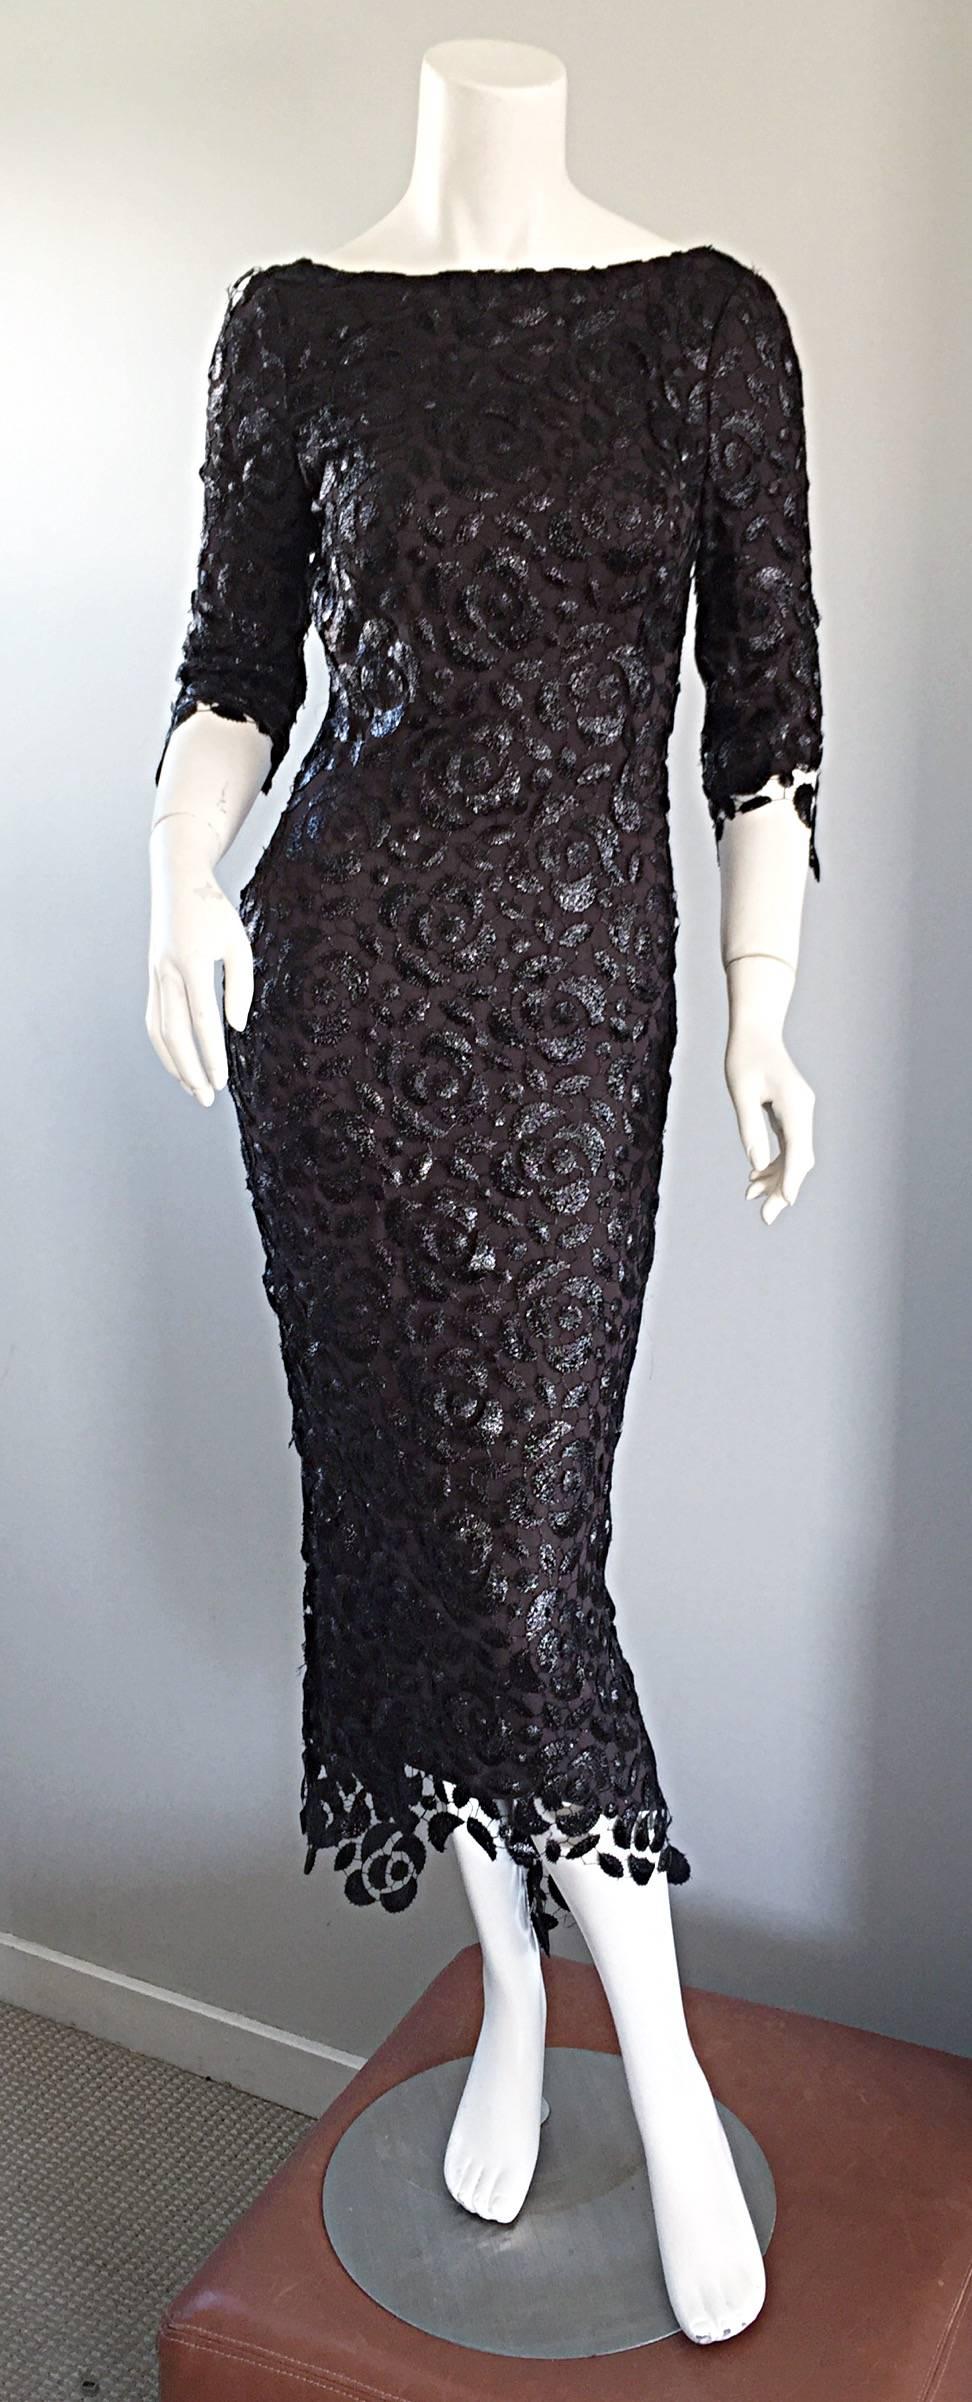 Insanely gorgeous vintage HALSTON (new with $9,800 price tag) black silk 3/4 sleeve silk lace crochet dress! Features incredible black silk crochet lace over a luxurious black silk shell. Sexy plunging back reveals just the right amount of skin.